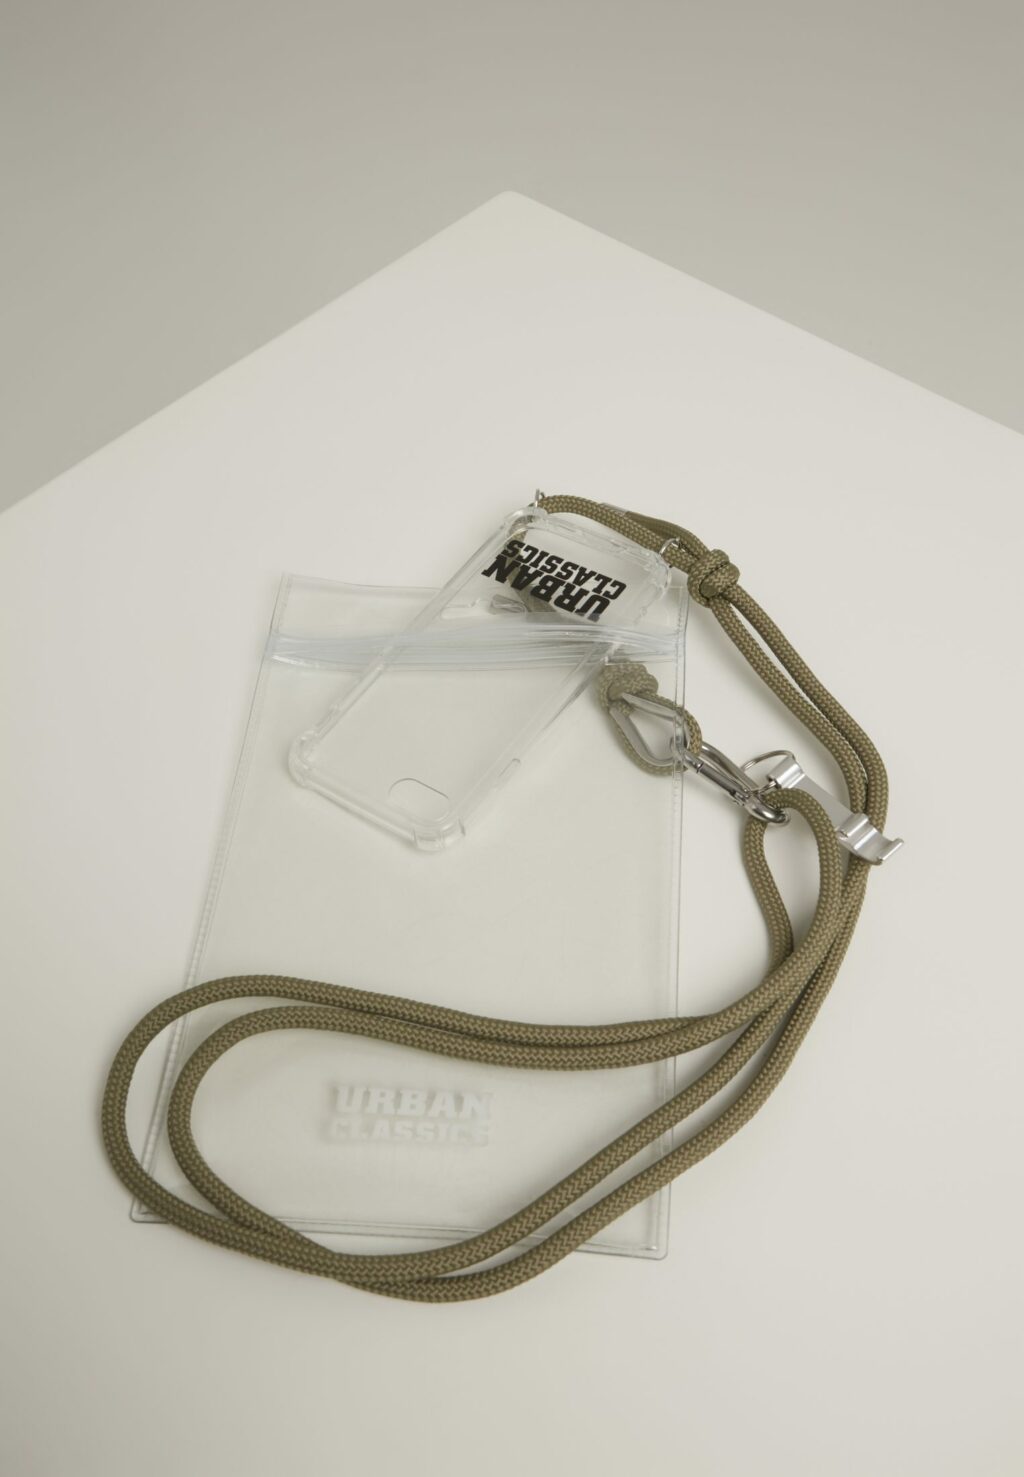 Phone Necklace with Additionals I Phone 8 transparent/olive one TB3301